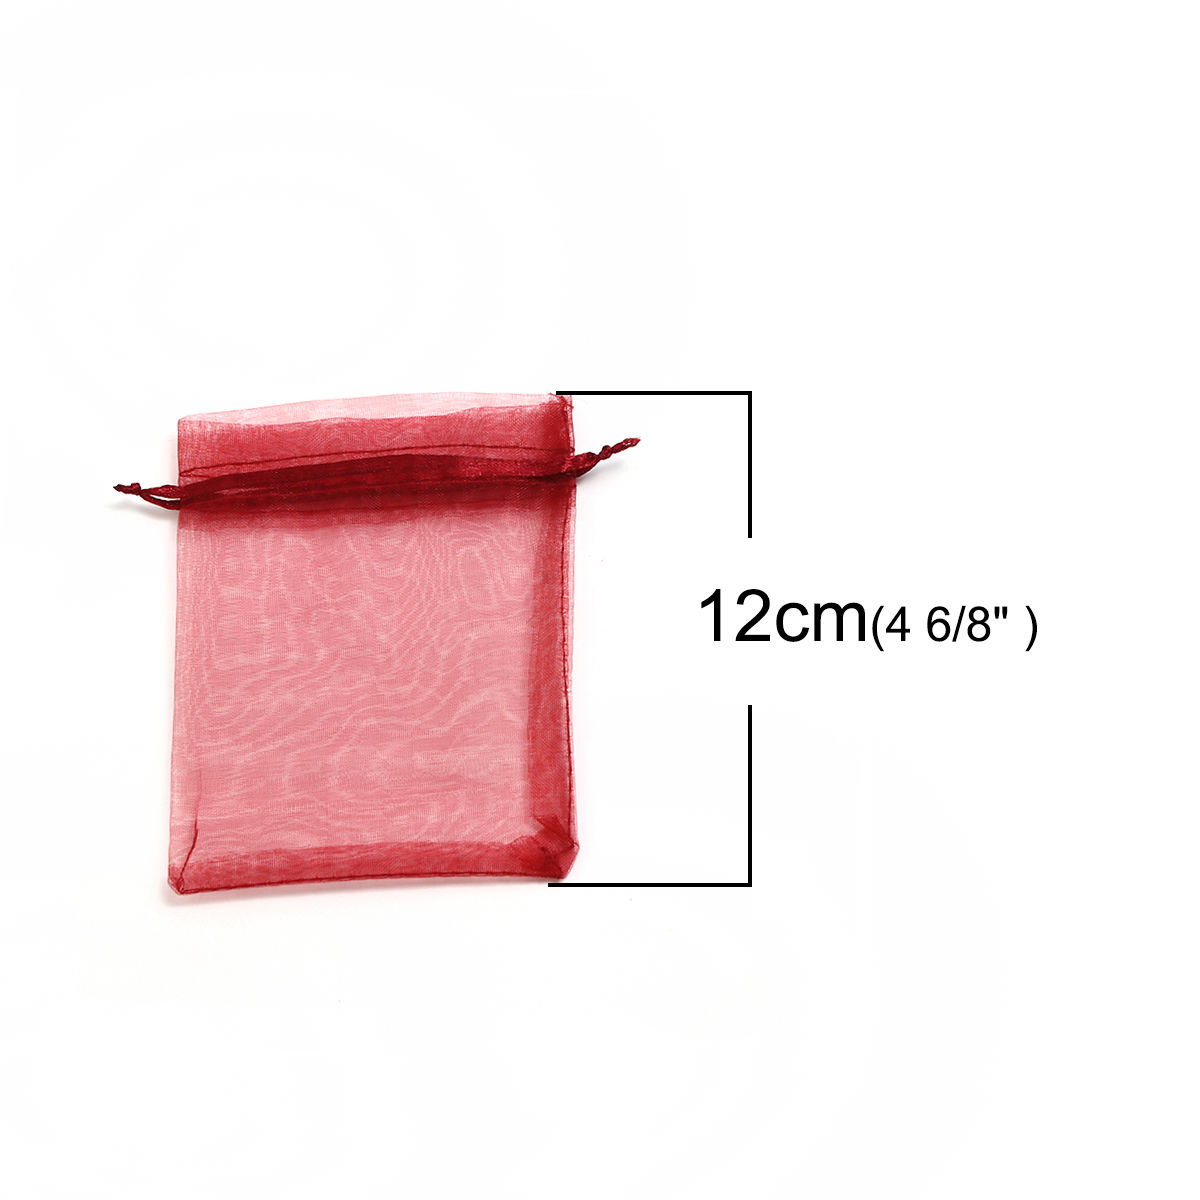 Picture of Wedding Gift Organza Jewelry Bags Drawstring Rectangle Wine Red (Usable Space: 9.5x9cm) 12cm(4 6/8") x 9cm(3 4/8"), 50 PCs